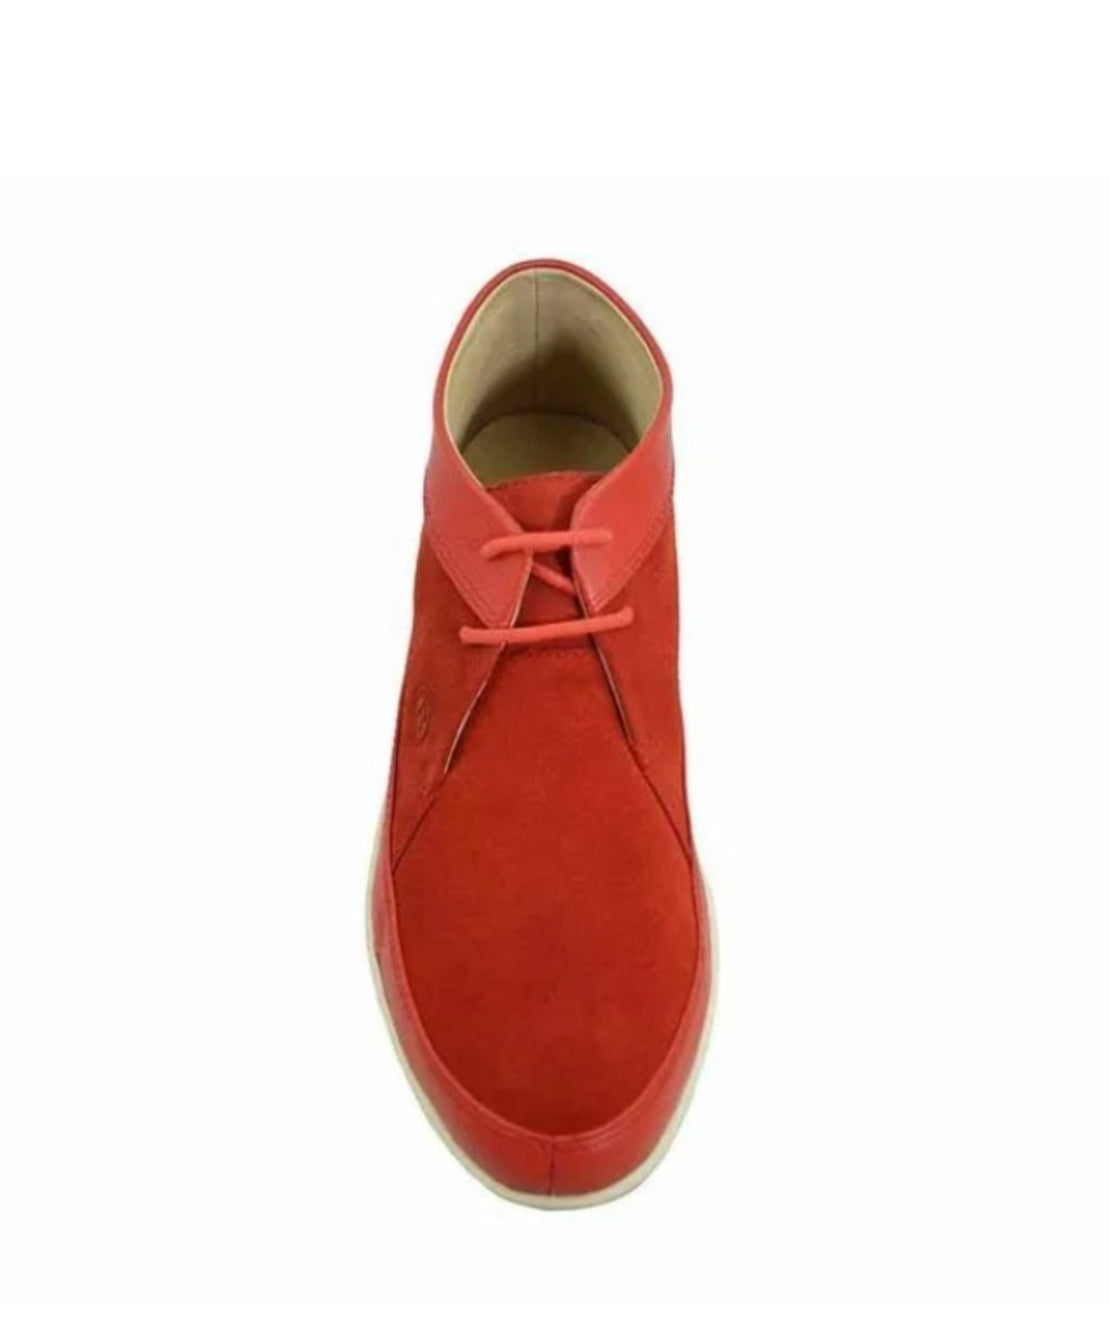  High Quality Bally Style Central Park Men's Red High Top Shoes